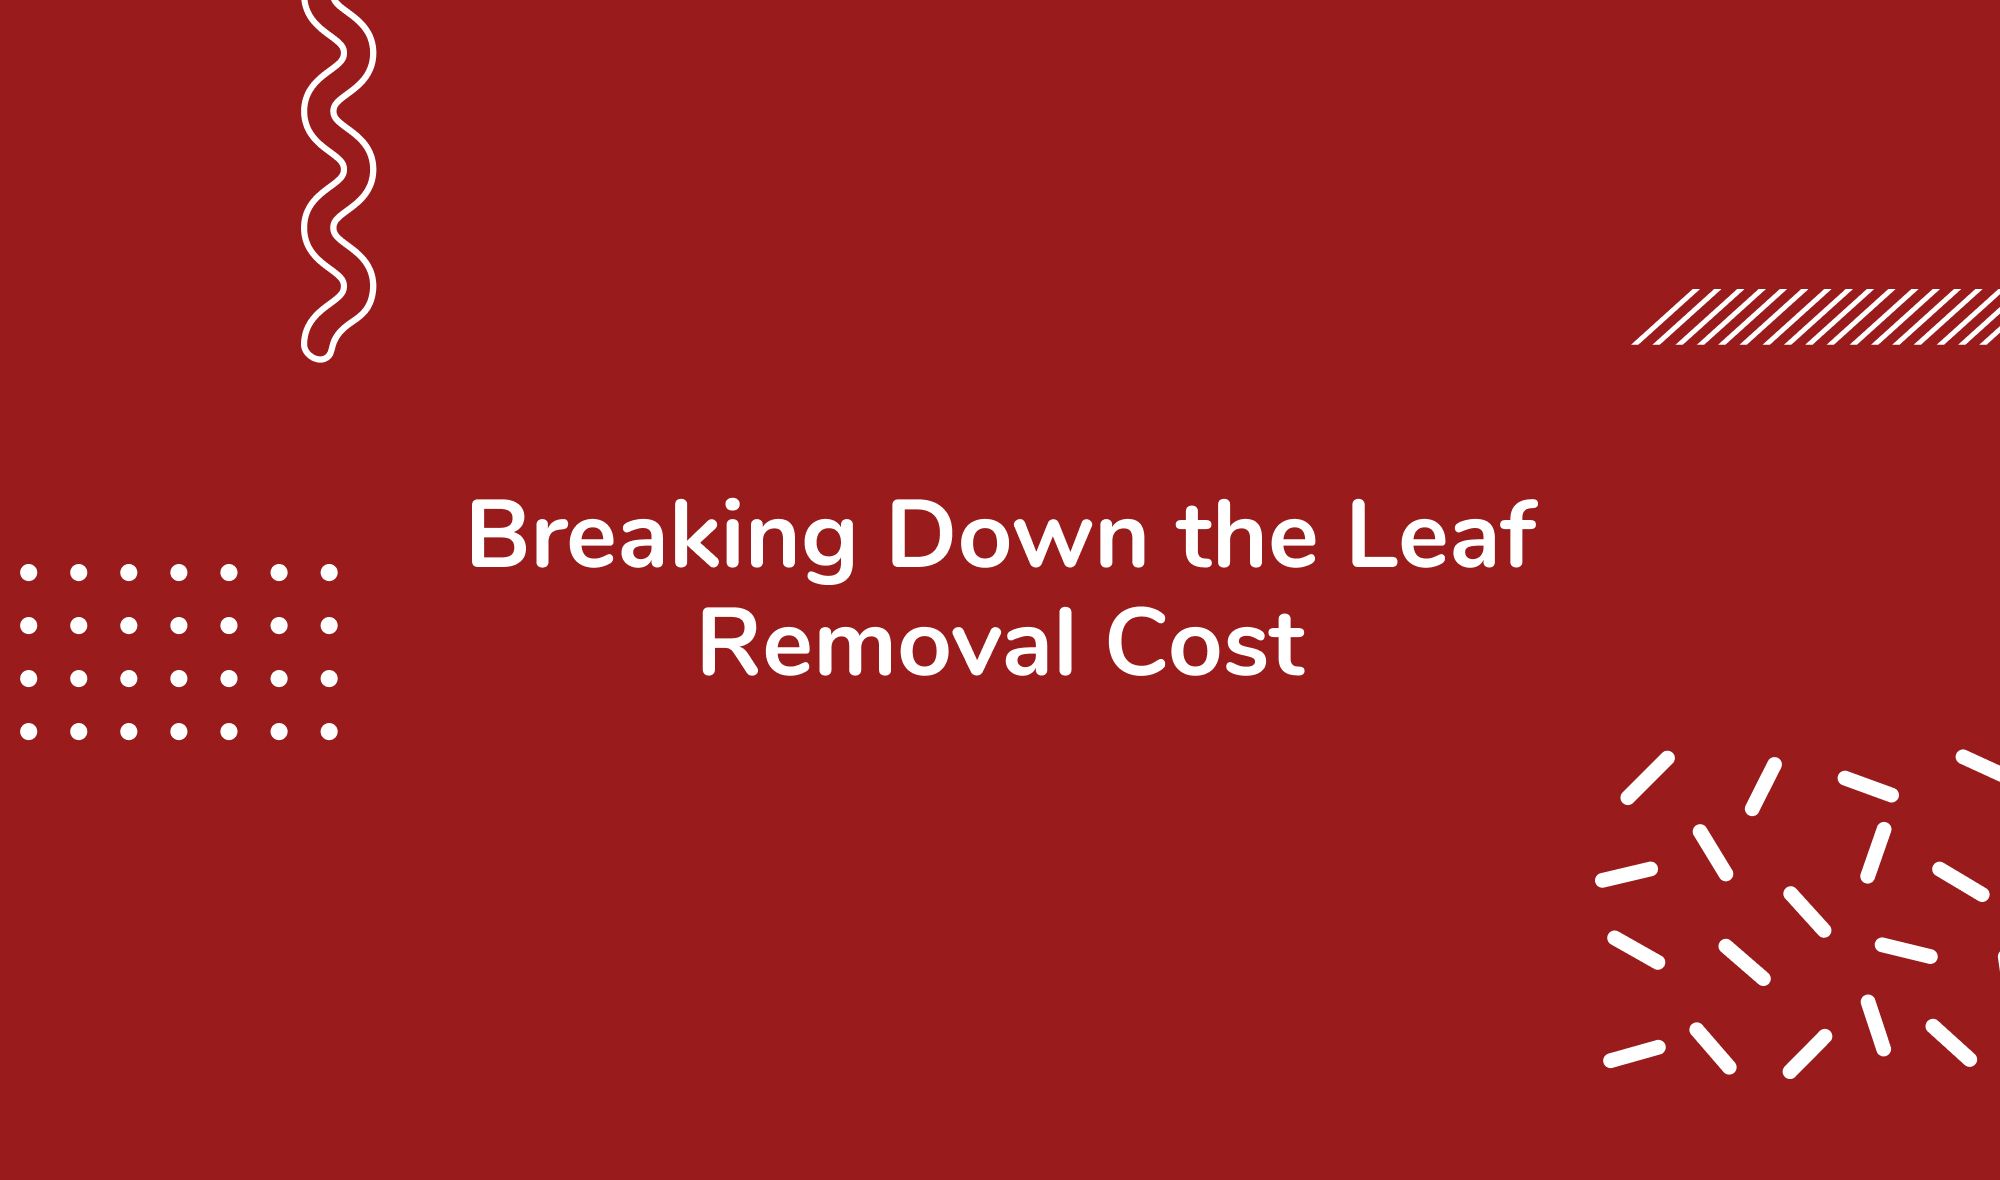 Breaking Down the Leaf Removal Cost